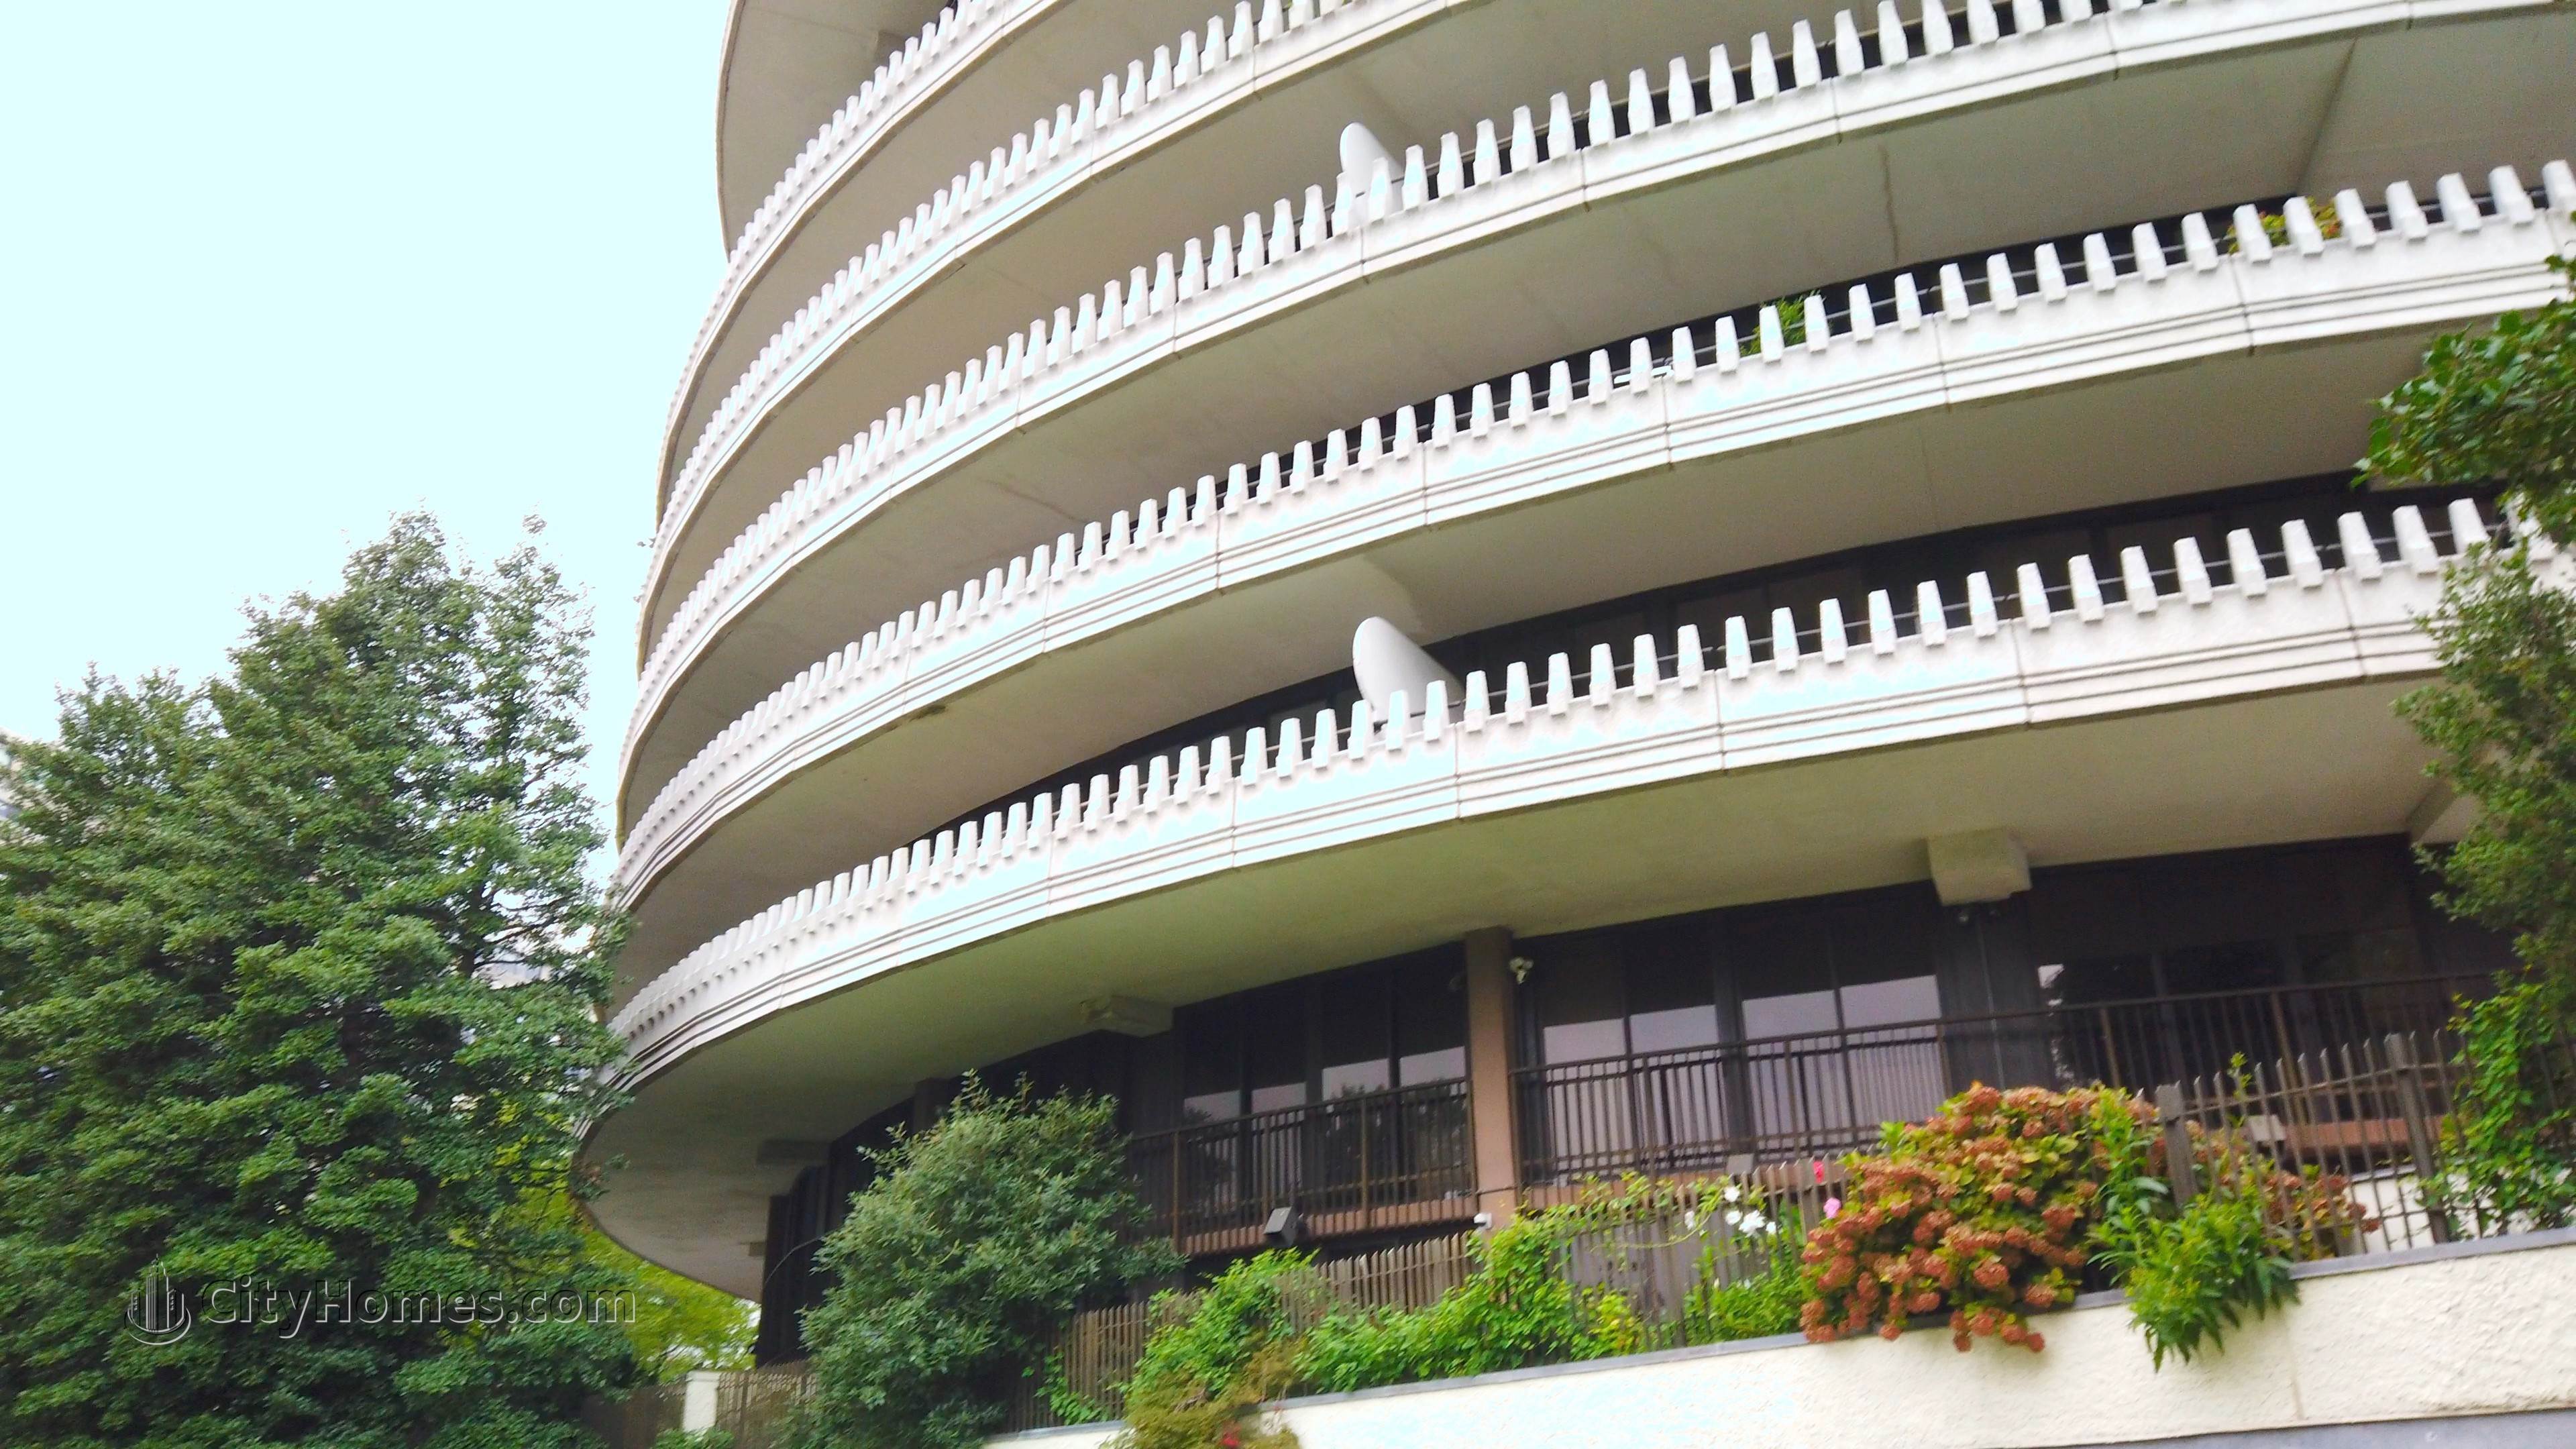 5. The Watergate building at 700 New Hampshire Ave NW, Foggy Bottom, Washington, DC 20037